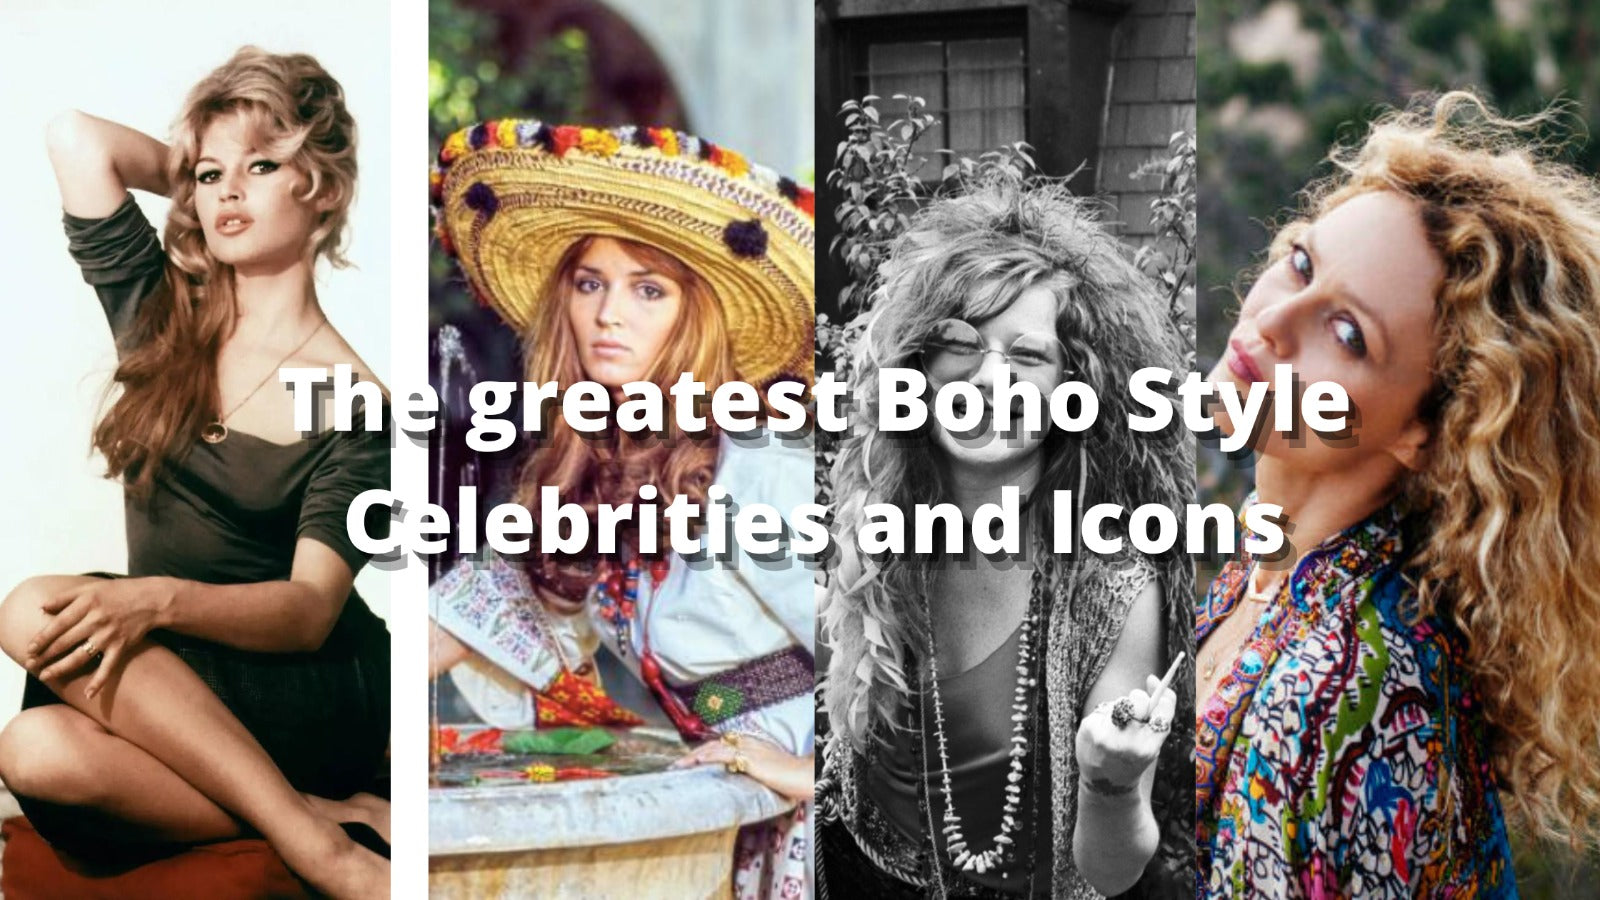 The greatest Boho Style Celebrities and Icons